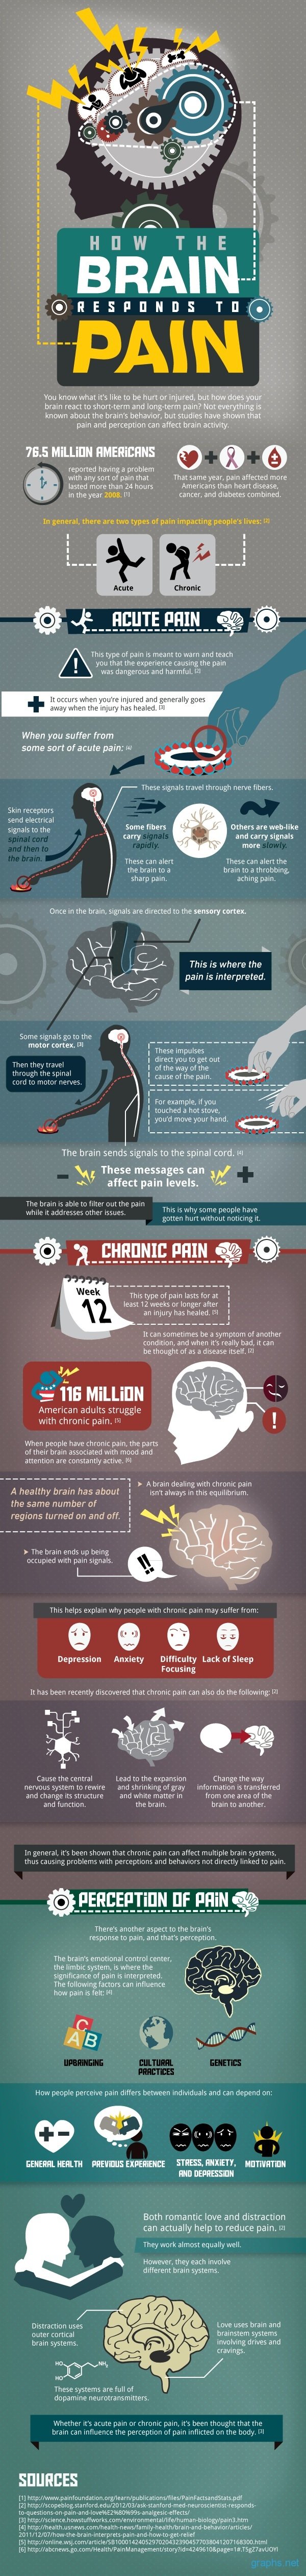 brain reacts to pain